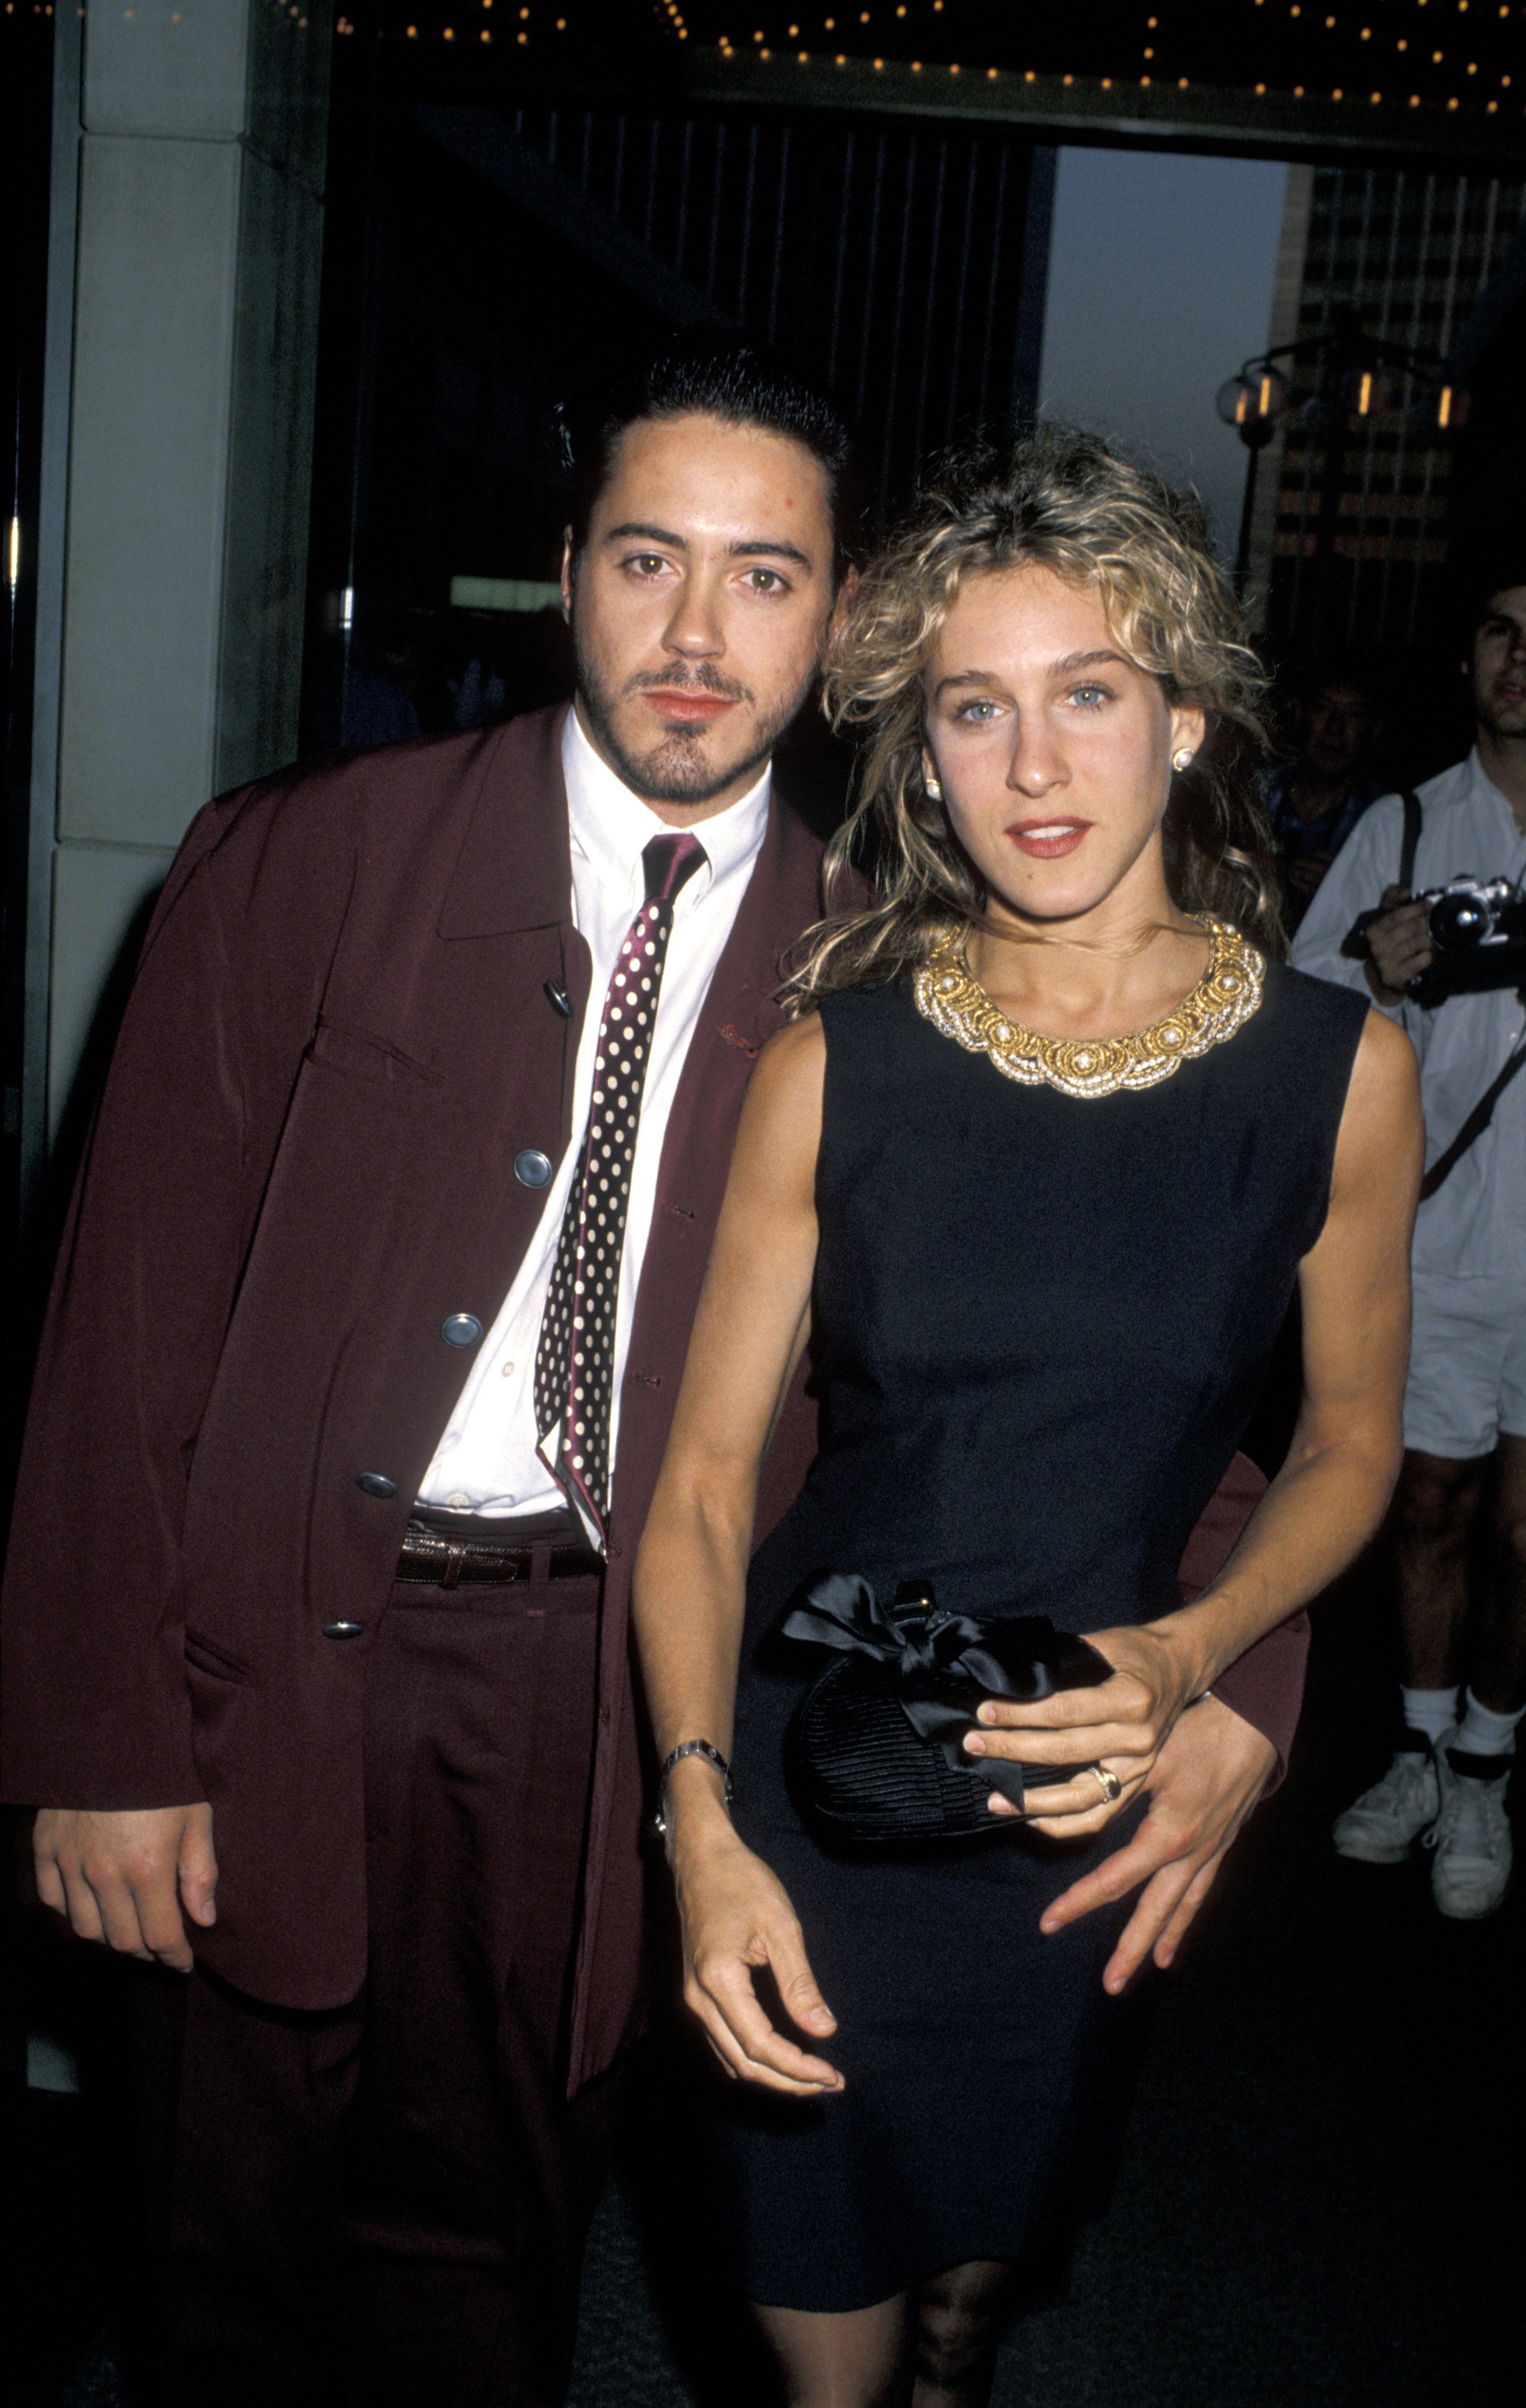 Robert Downey Jr. and Sarah Jessica Parker attend the ABC Annual Fall Affiliates Dinner in 1990